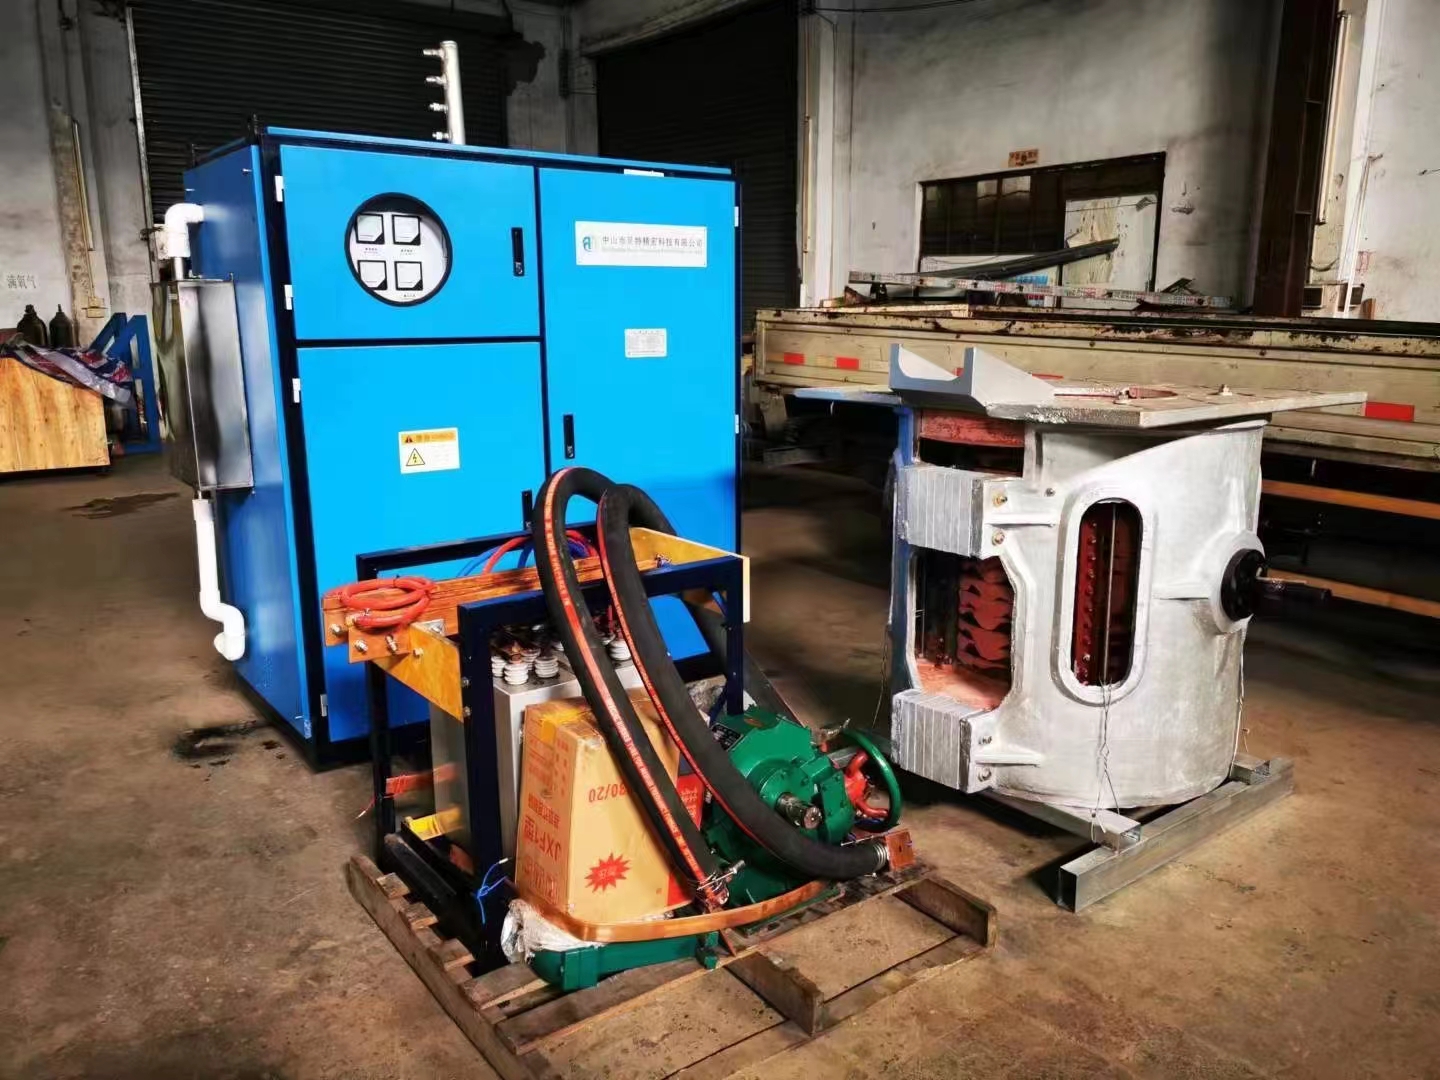 10KG t o1000kg induction foundry melting furnace for lead copper aluminum scrap materials 